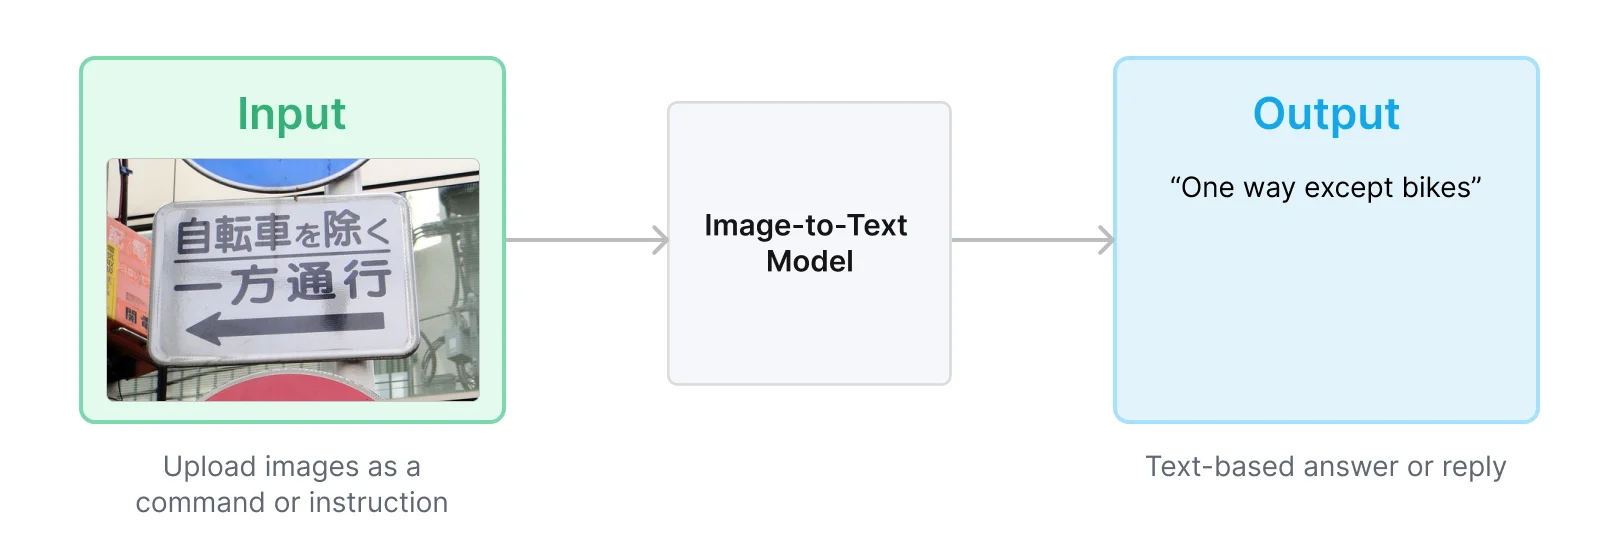 image to text model example